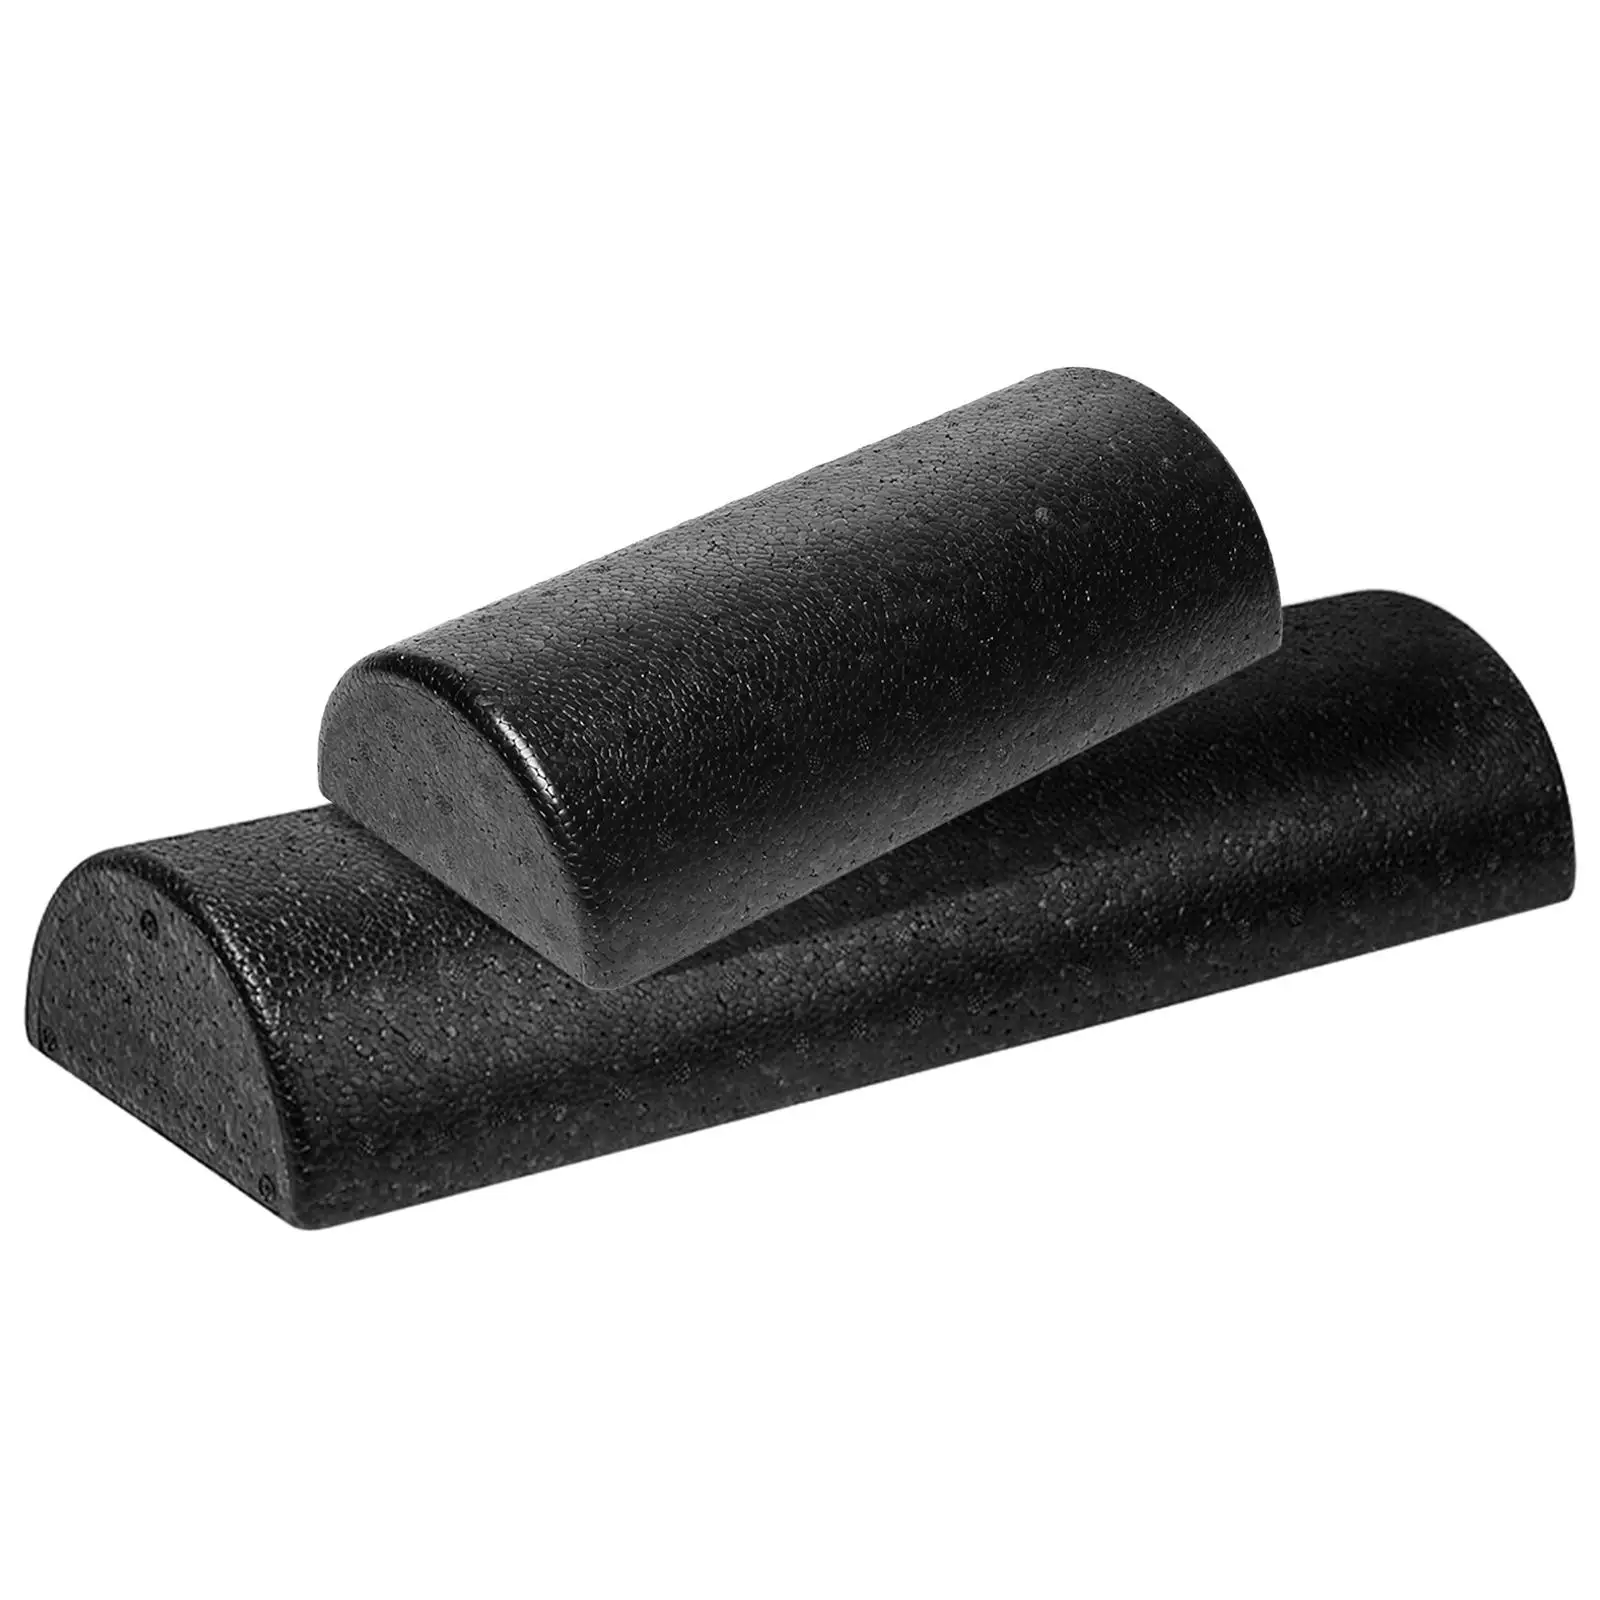 Roller for Yoga Column Workout Tool `Roller in half for yoga exercise training